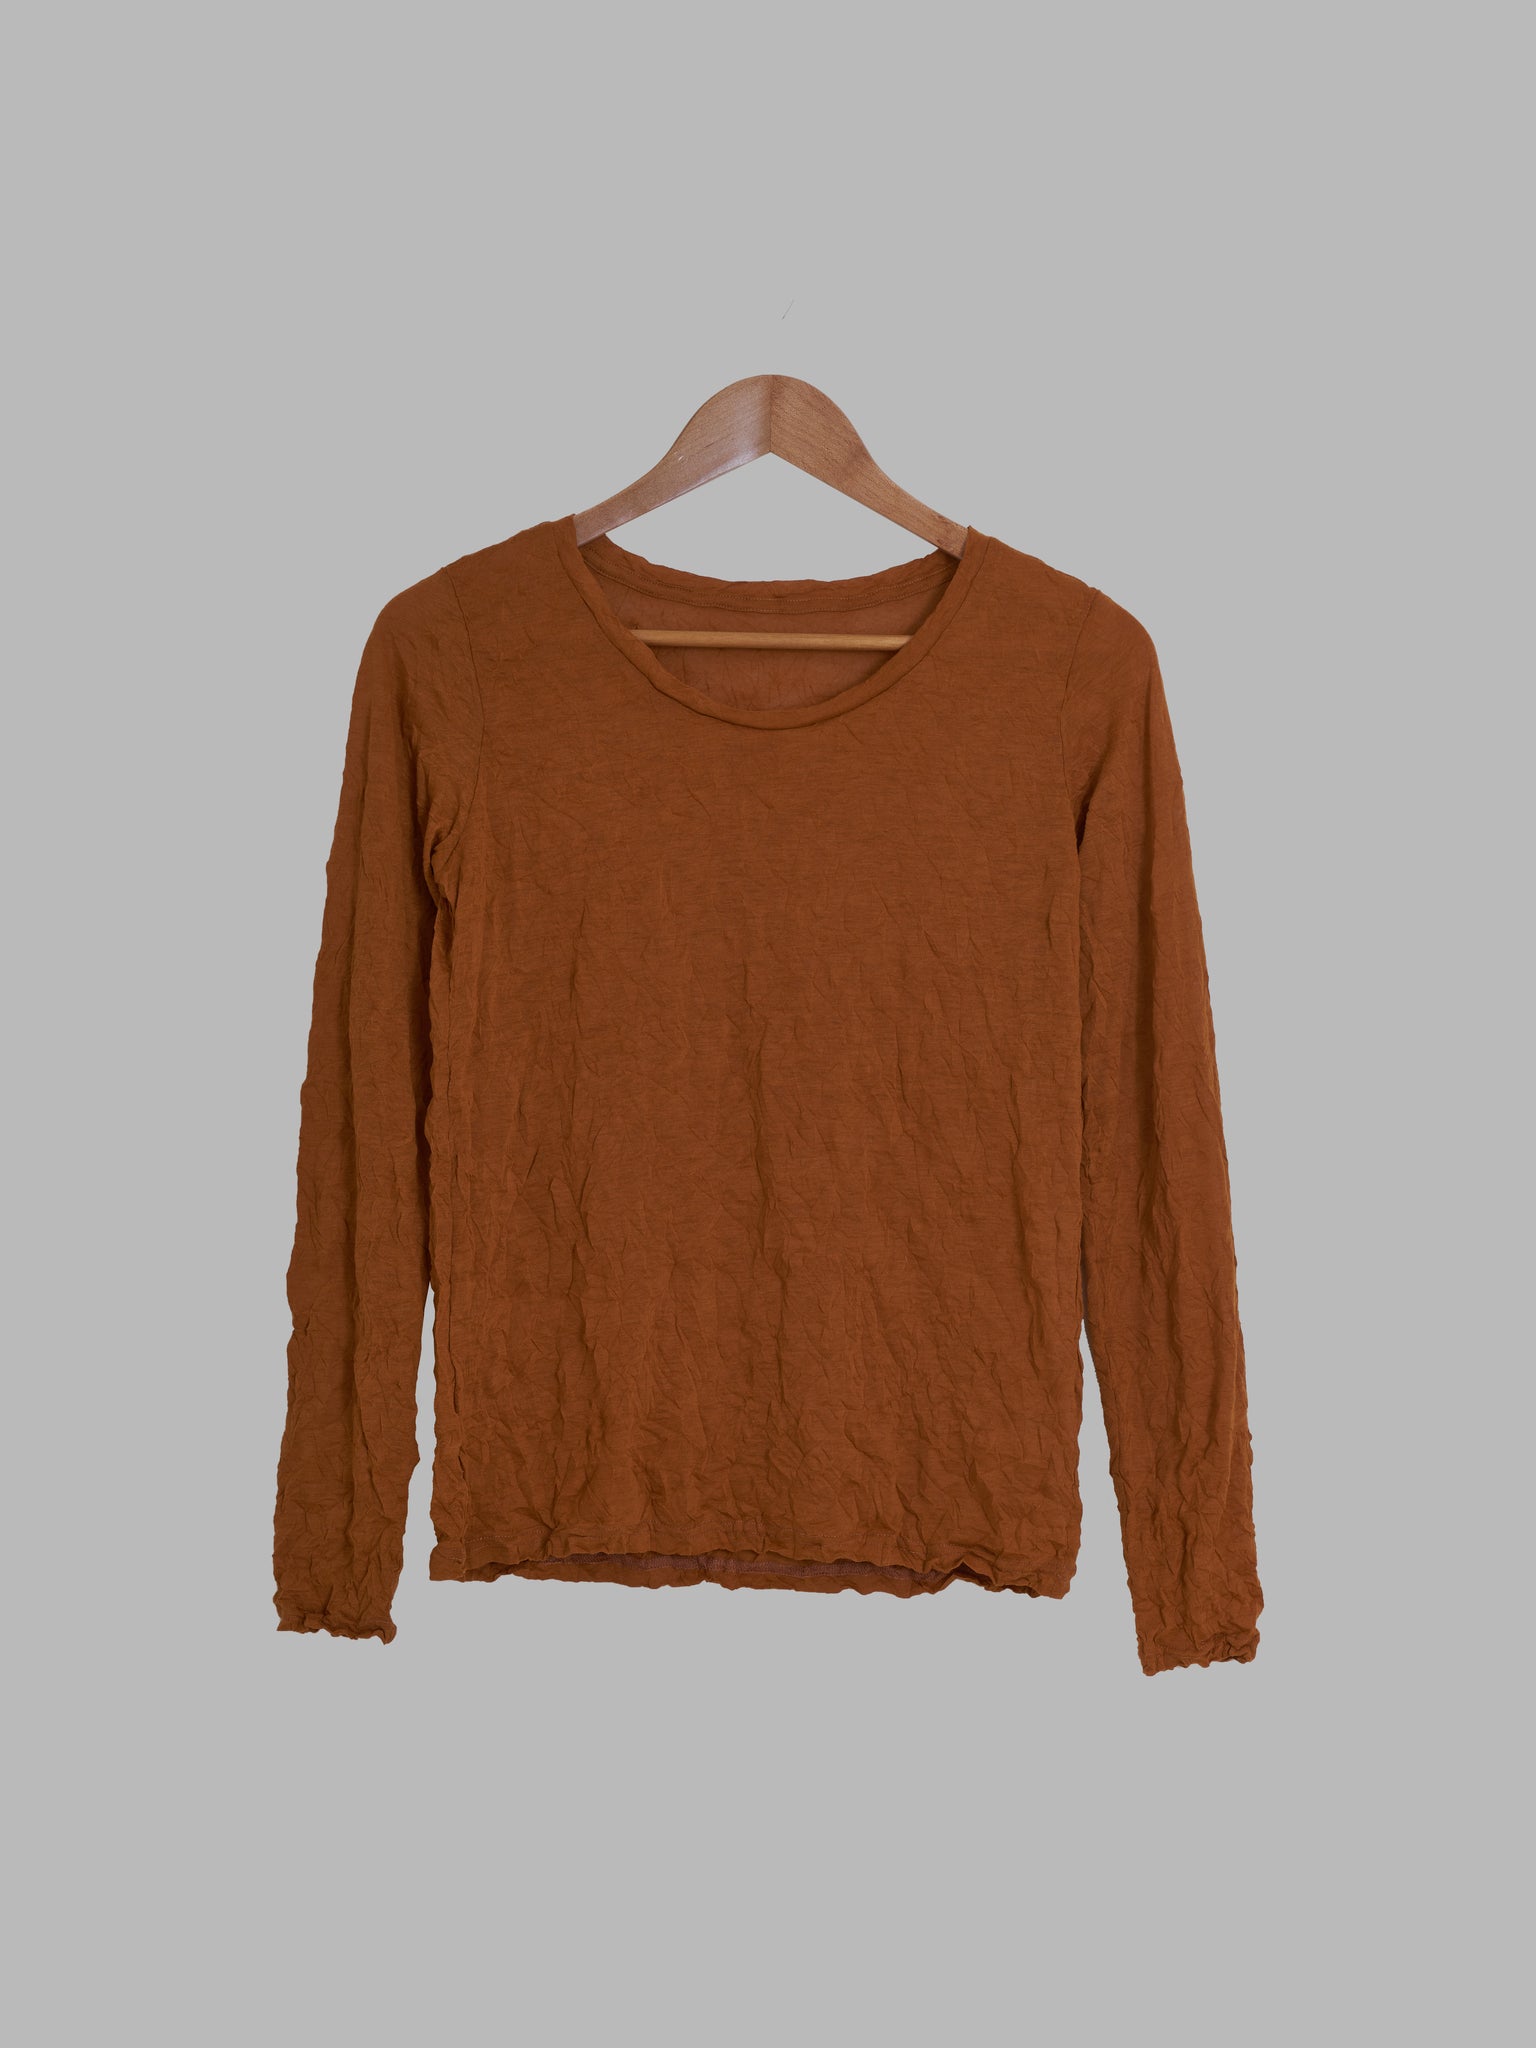 Issey Miyake me brown wrinkled polyester round neck long sleeve top